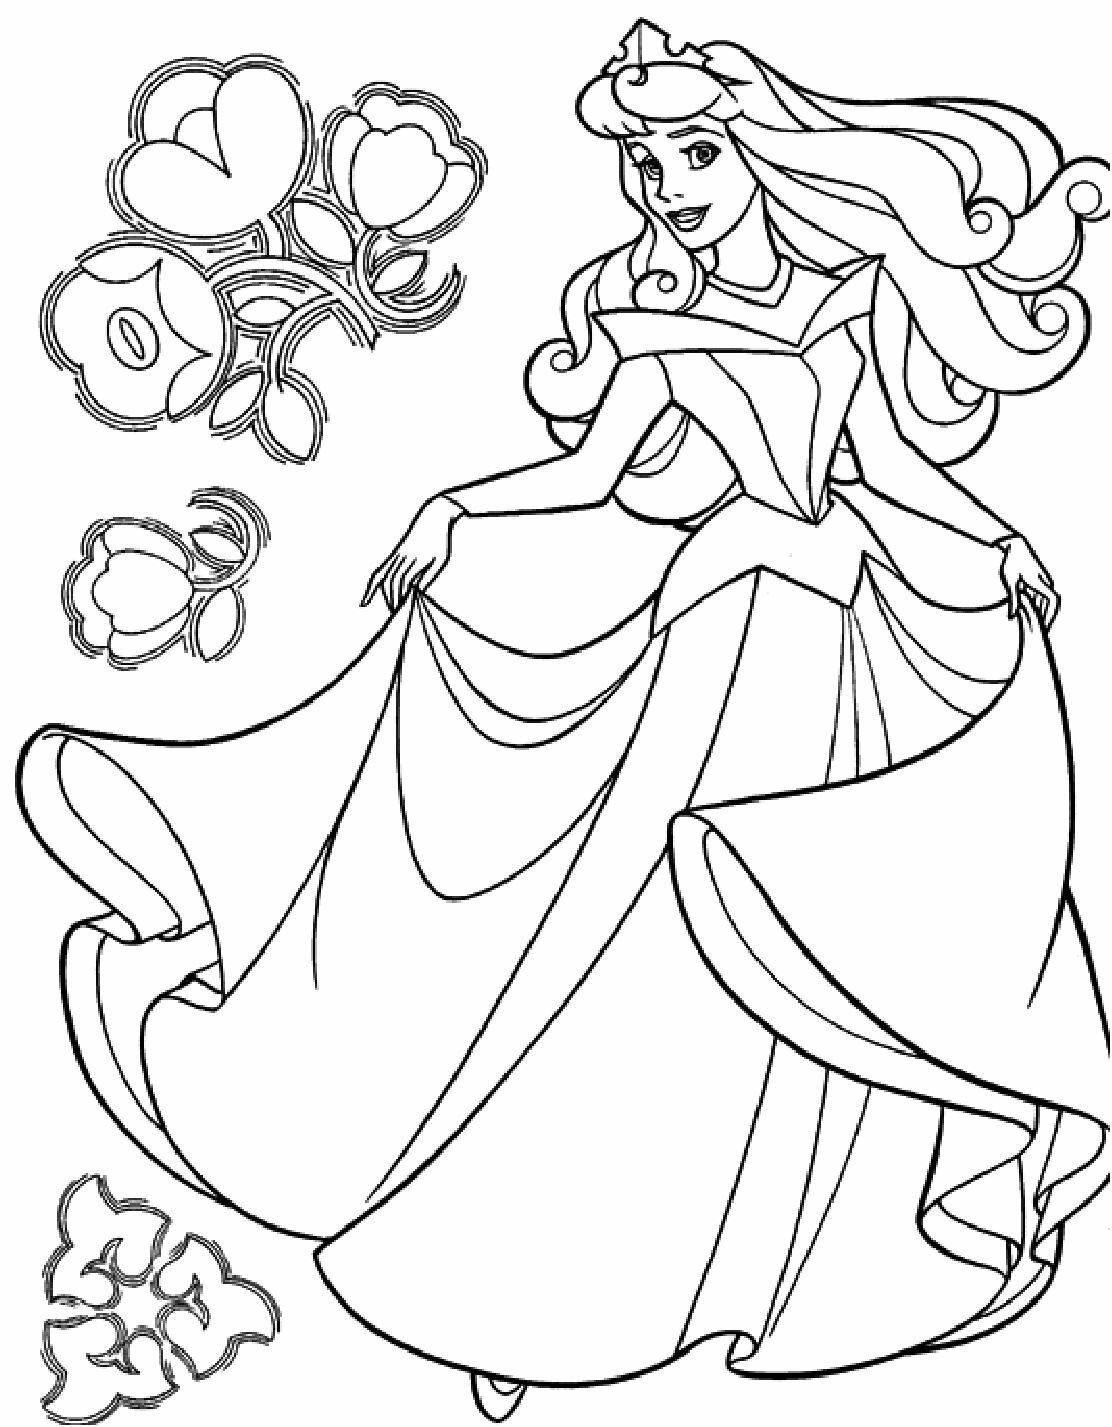 remarkable Cinderella coloring pages free printable coloring worksheets 6 contemporary model – cinderella coloring pages free to print